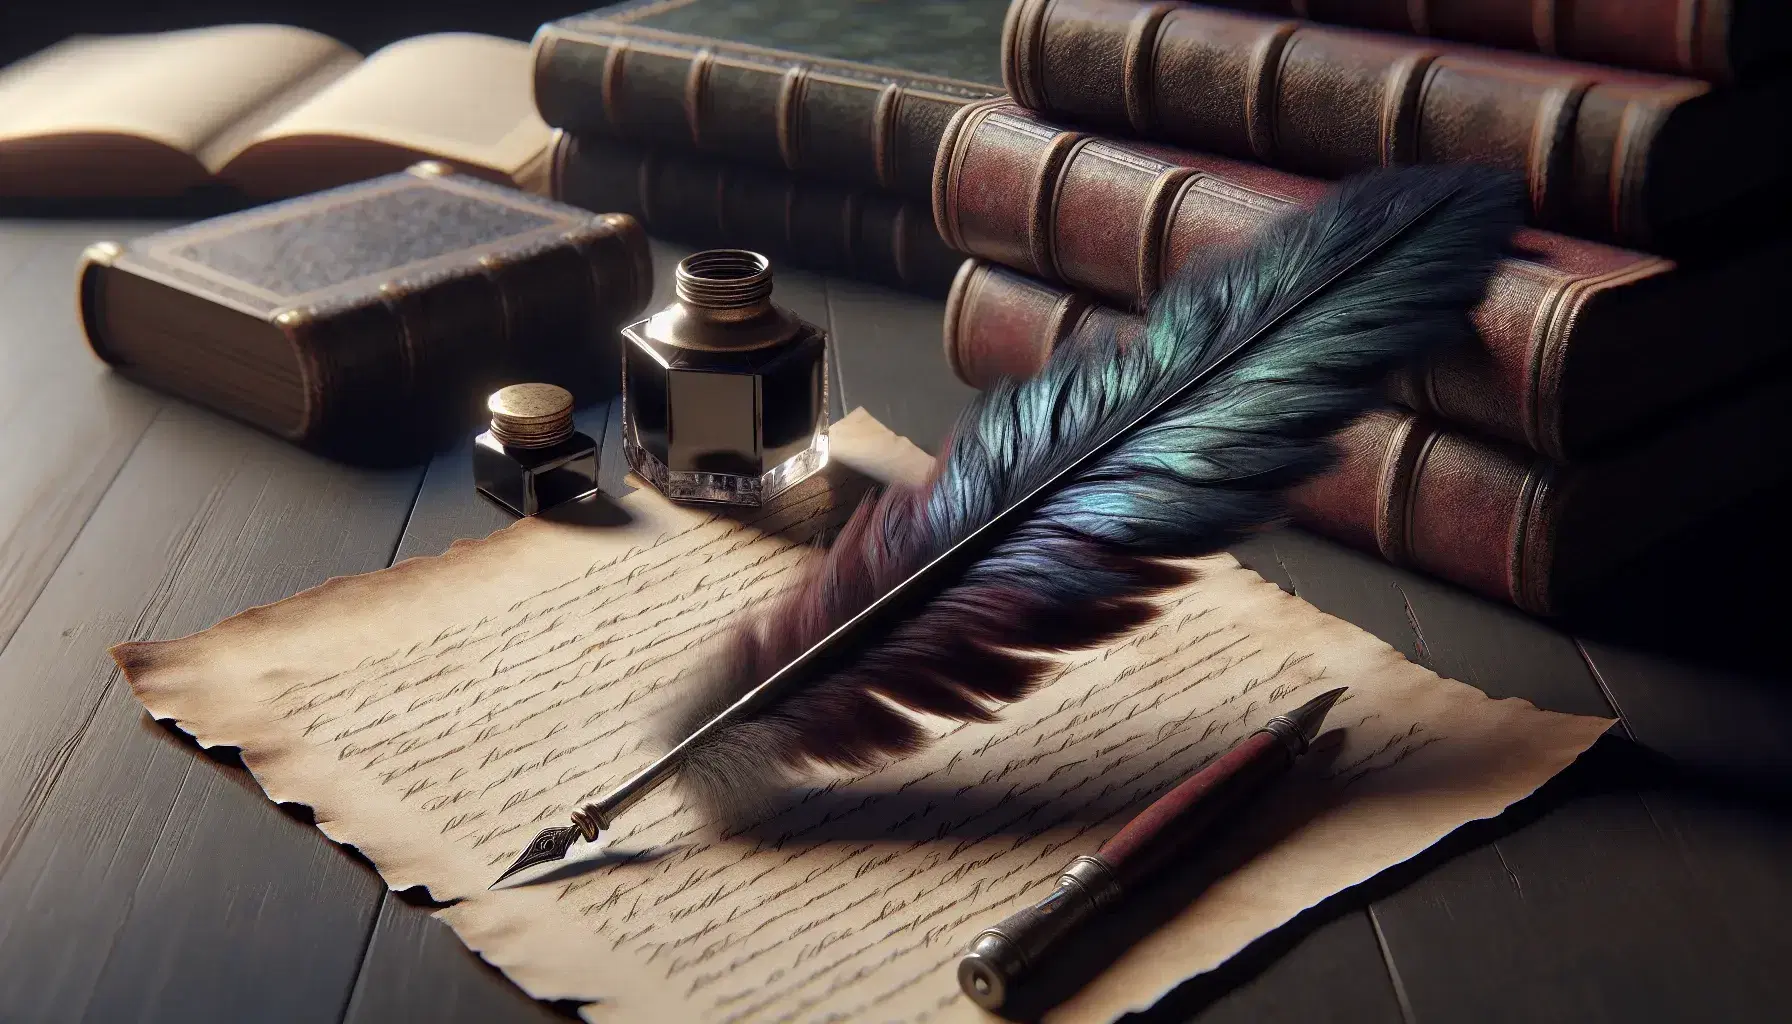 Quill pen on blank parchment with open brass inkwell and blurred leather-bound books in the background on a dark wooden desk.